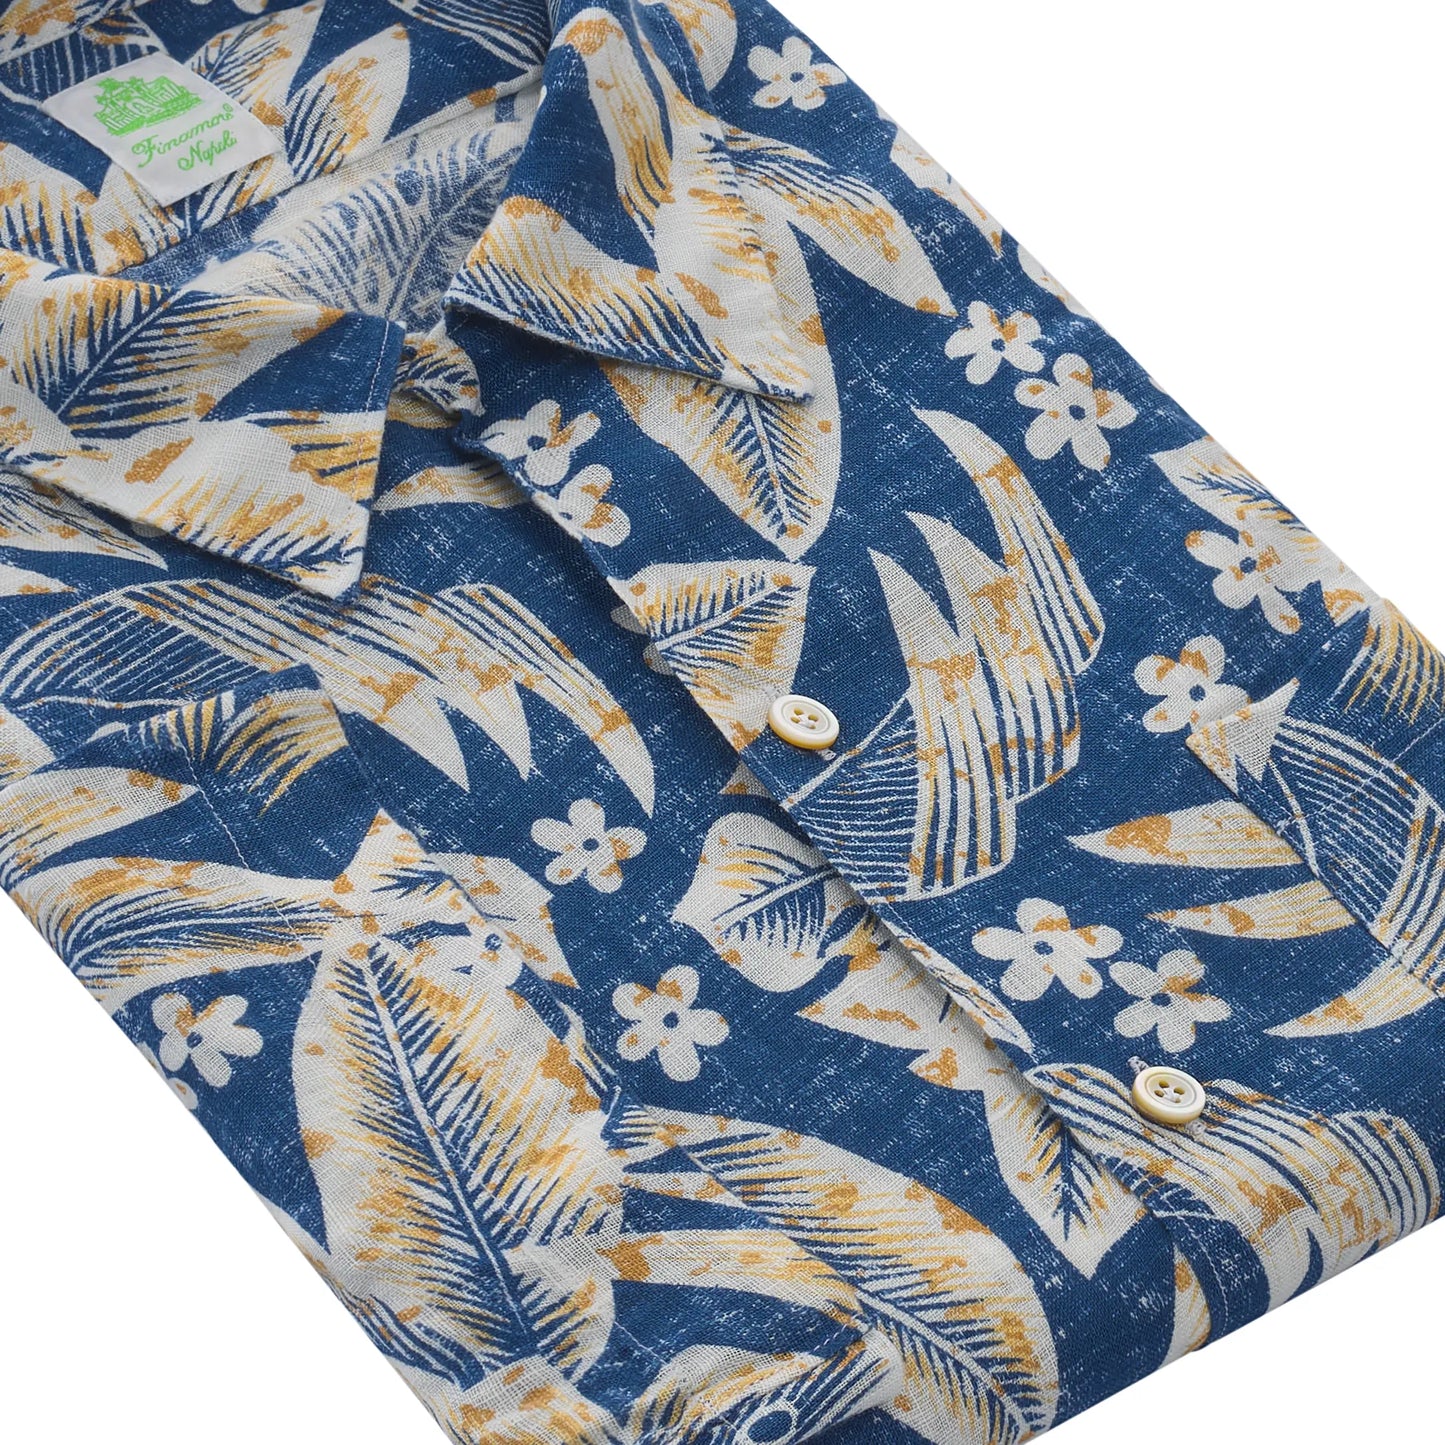 Flower Casual Bart Shirt with Blue Flowers Pattern